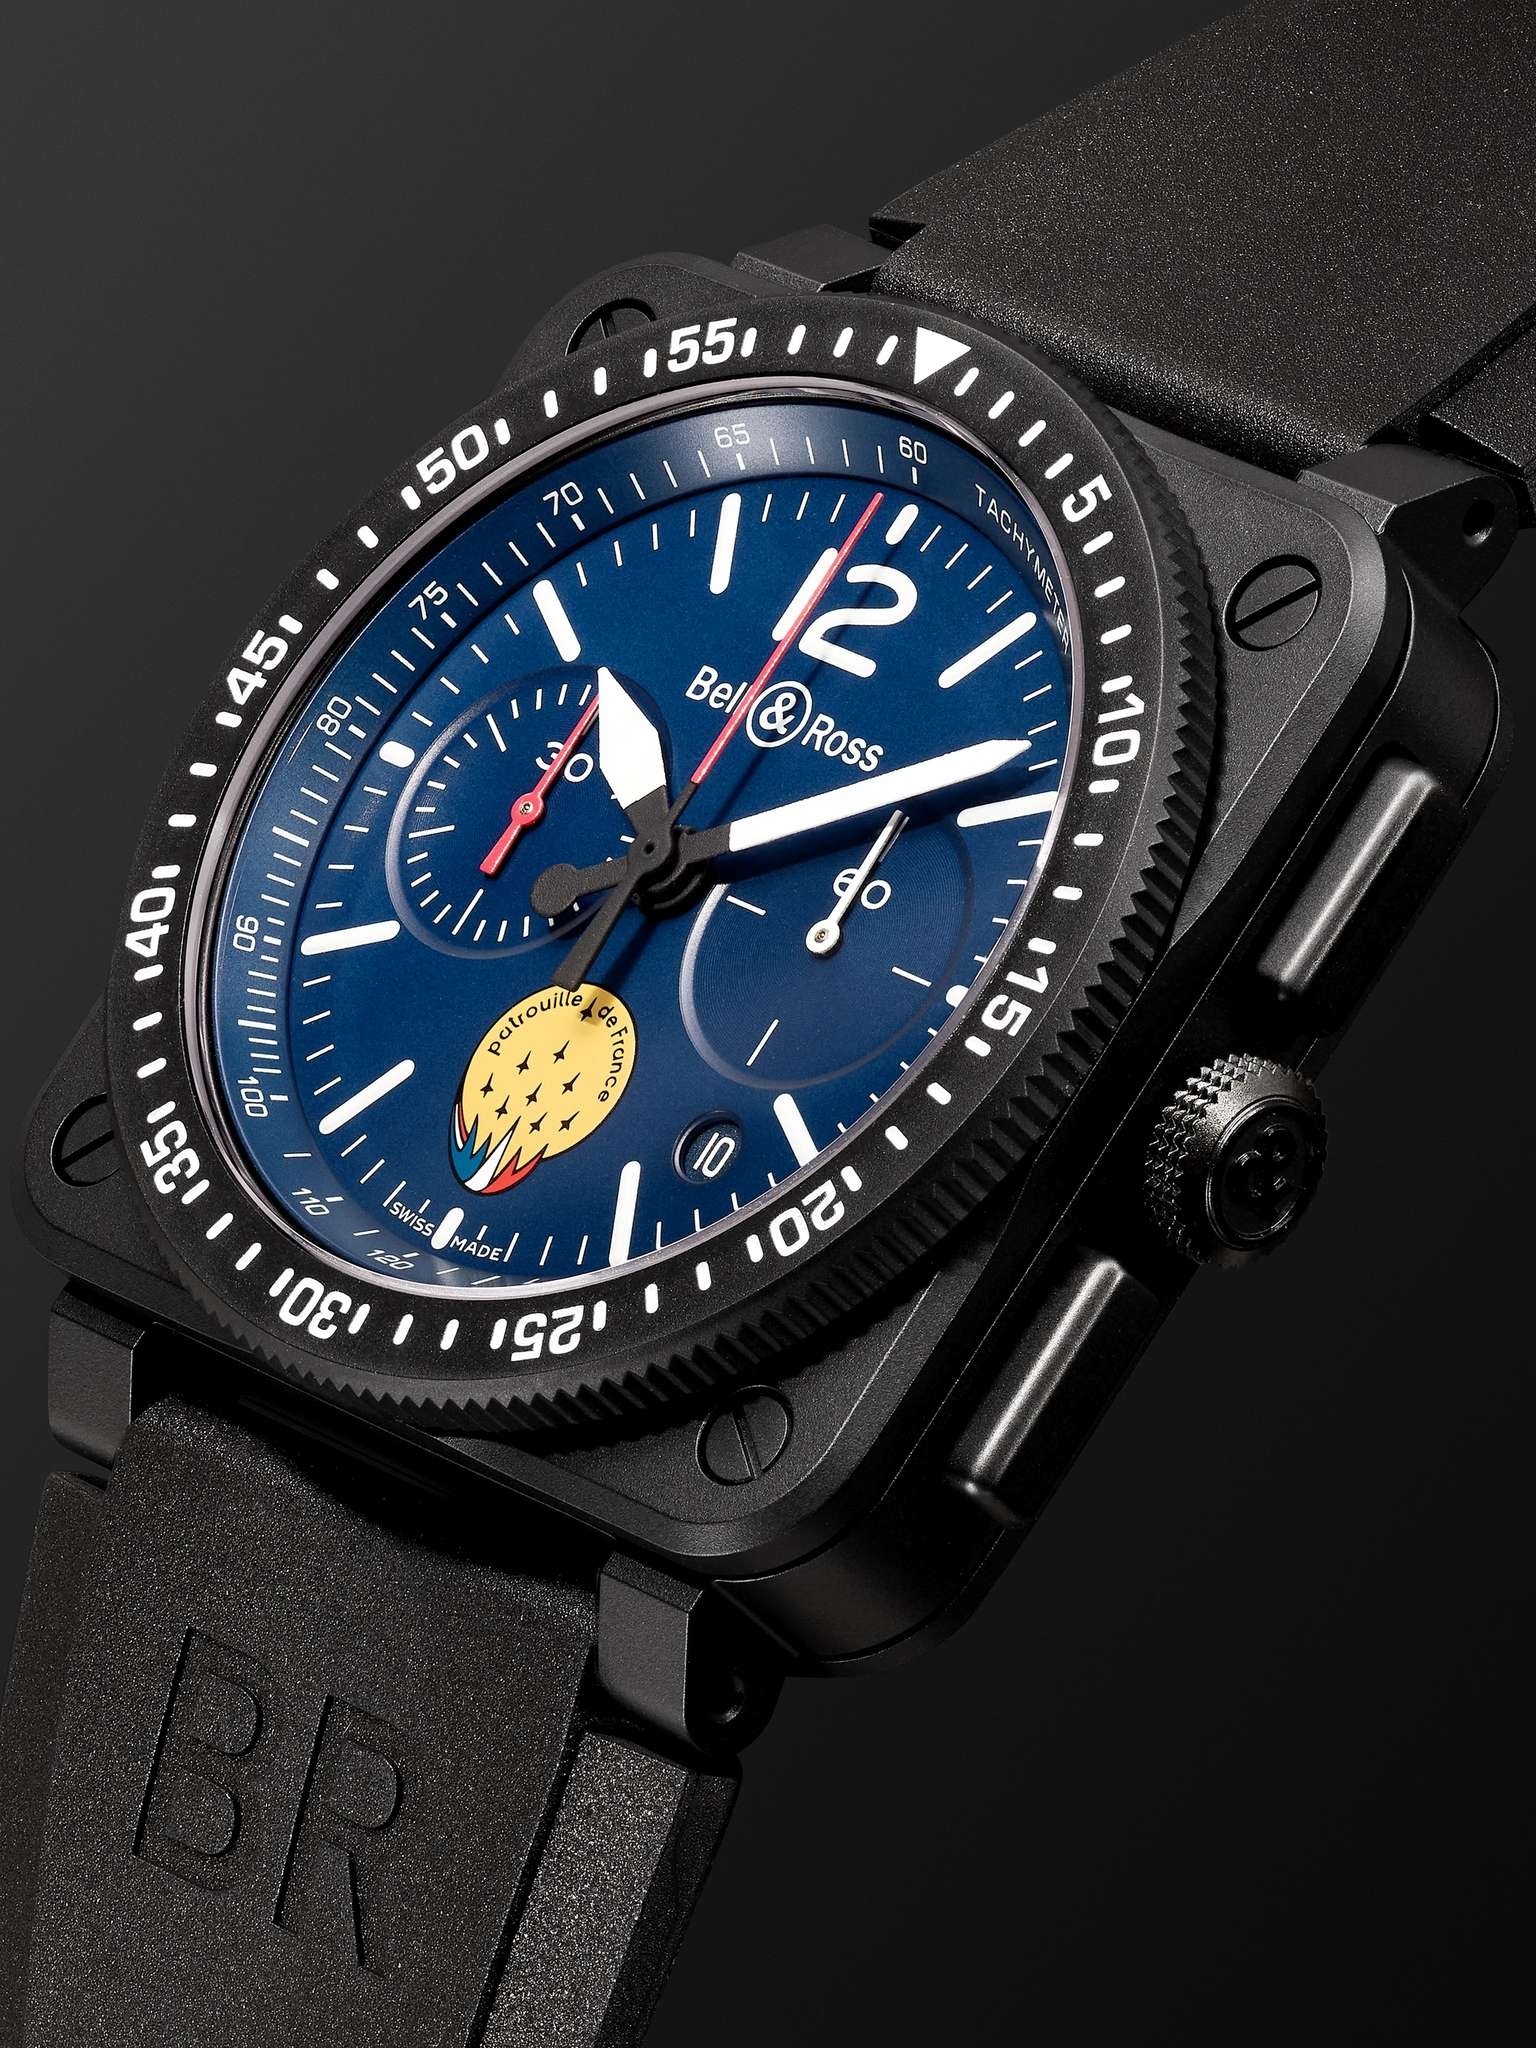 BR 03-94 PA94 Patrouille de France Limited Edition Chronograph Ceramic and Rubber Watch, Ref. No. BR - 3